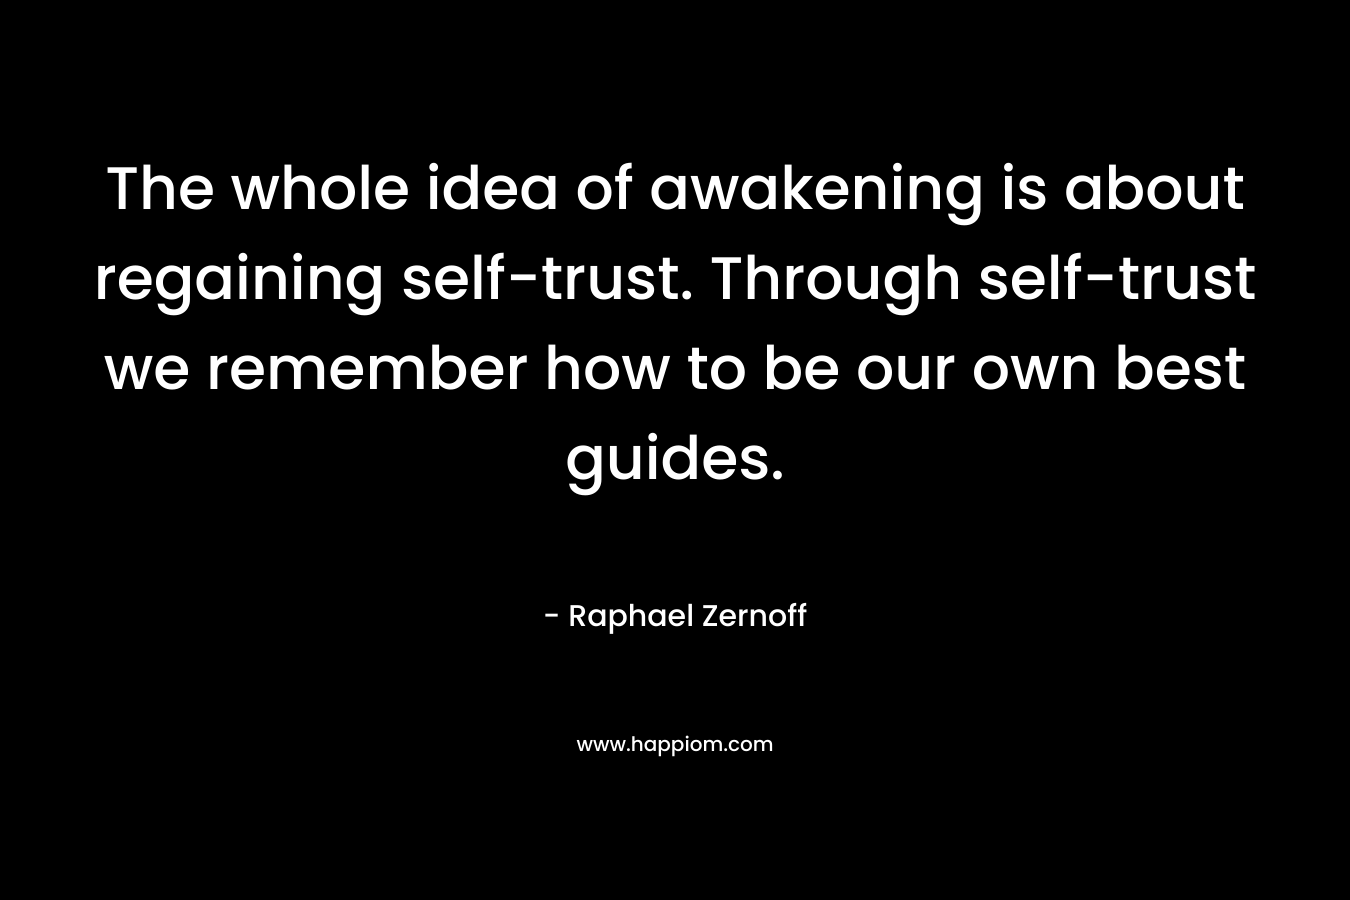 The whole idea of awakening is about regaining self-trust. Through self-trust we remember how to be our own best guides.